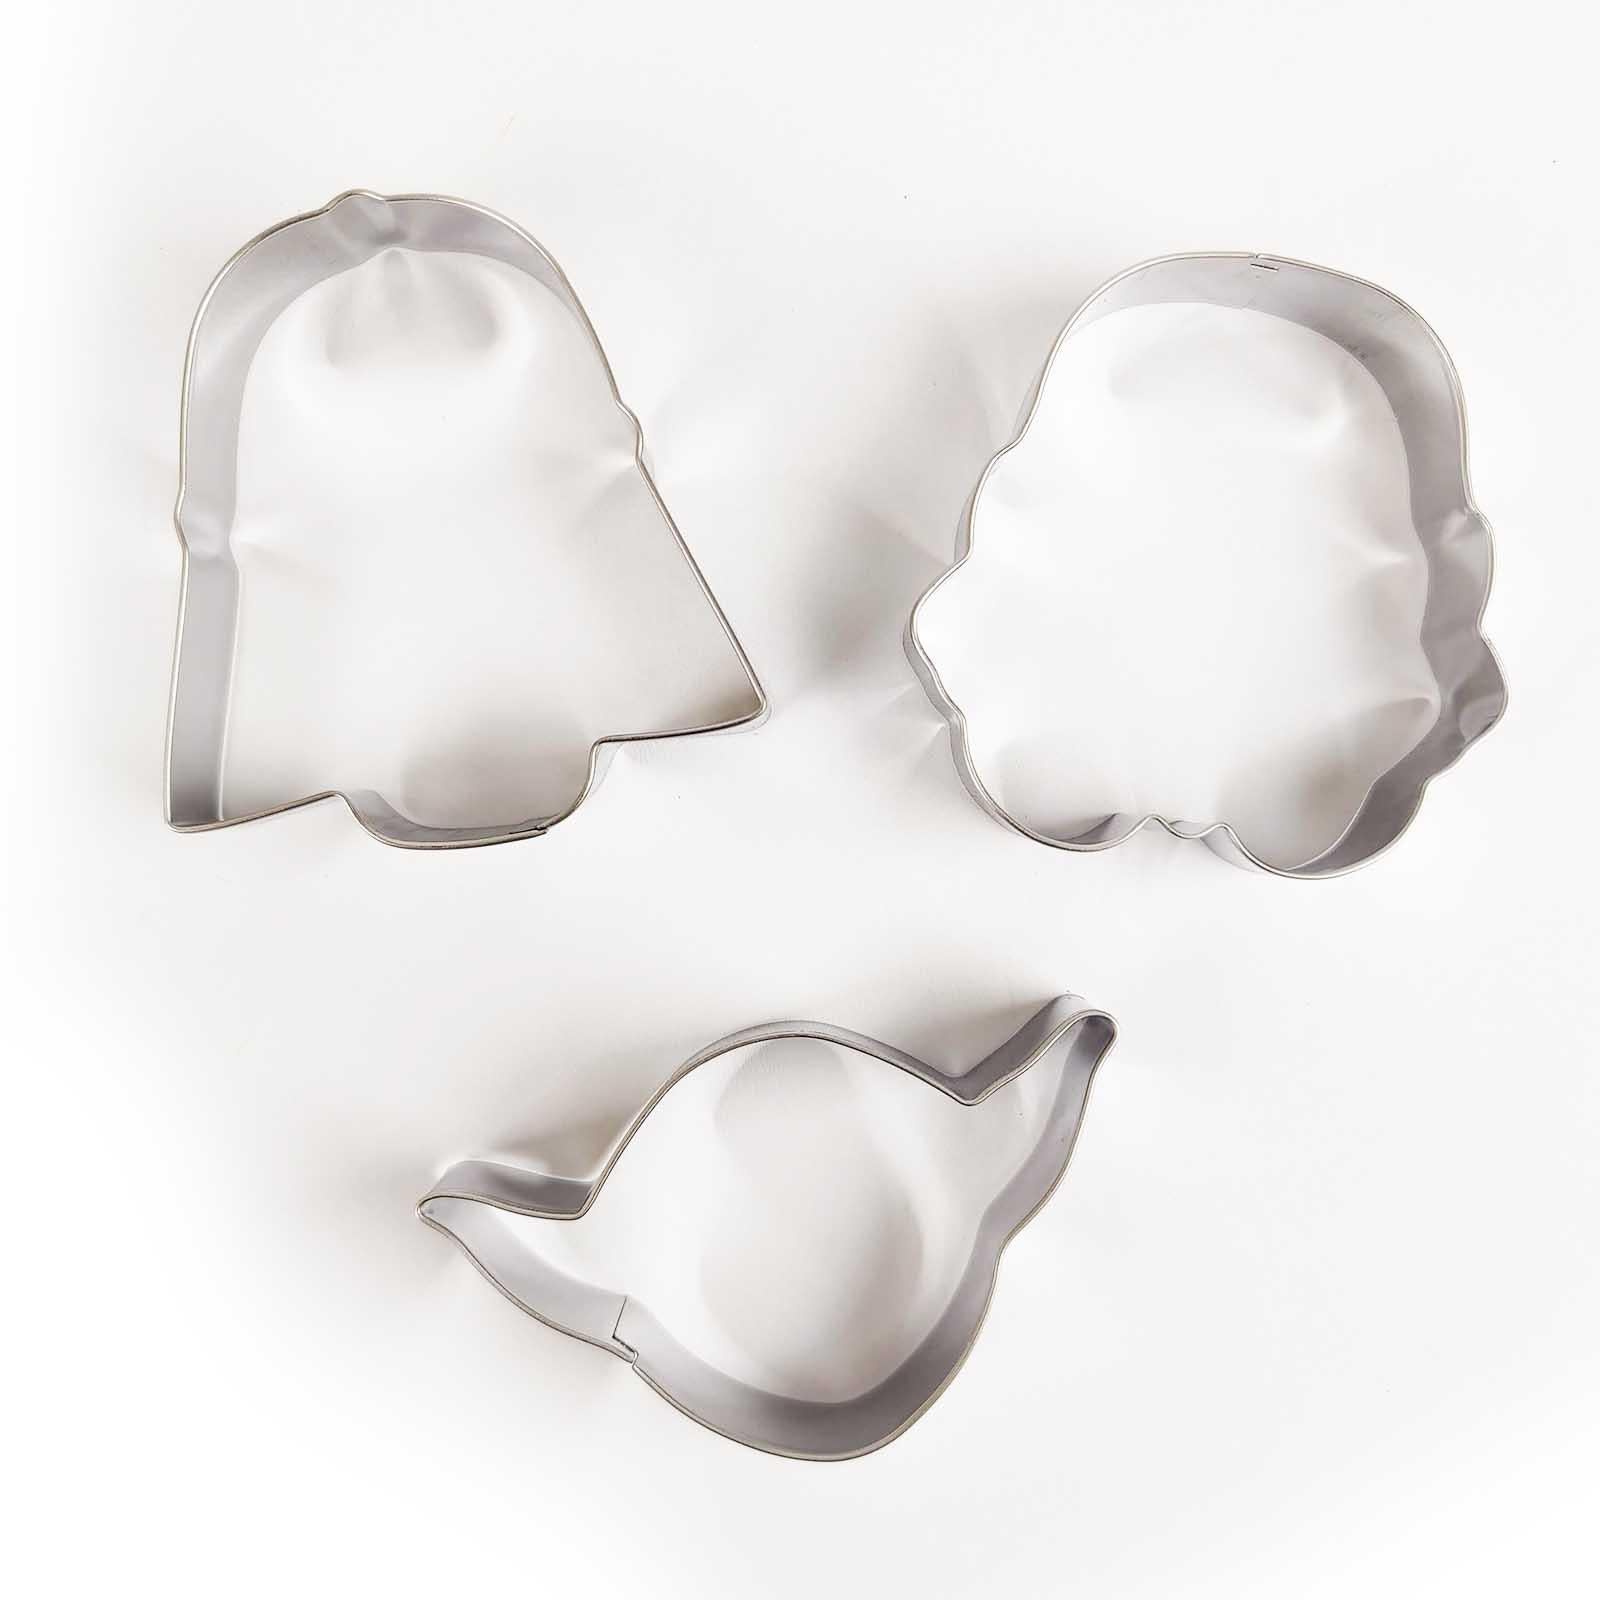 Set of 3 Star Wars Cookie Cutters